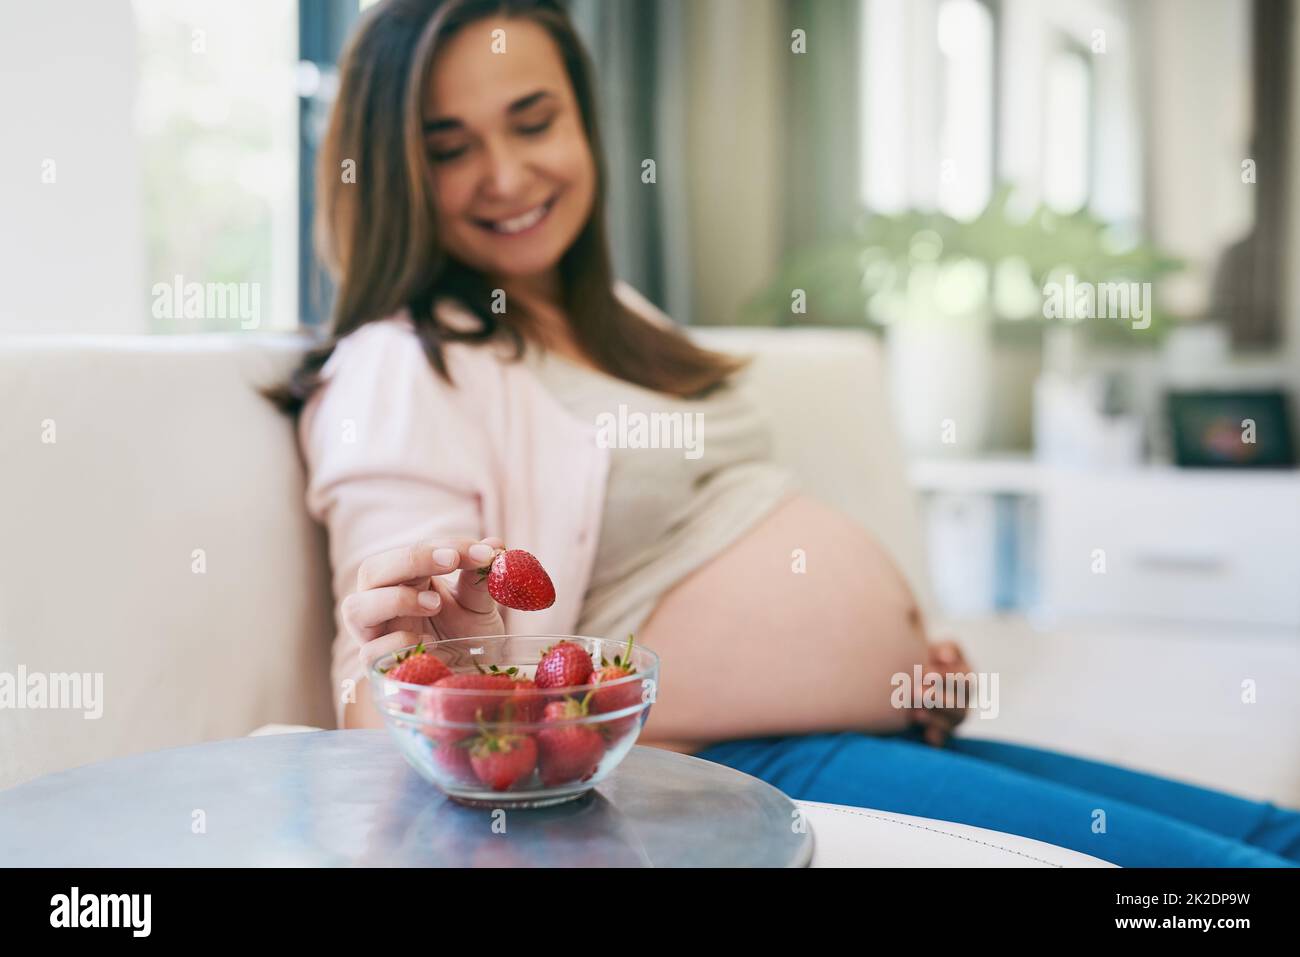 Snacking healthy. Shot of a pregnant woman snacking on strawberries. Stock Photo